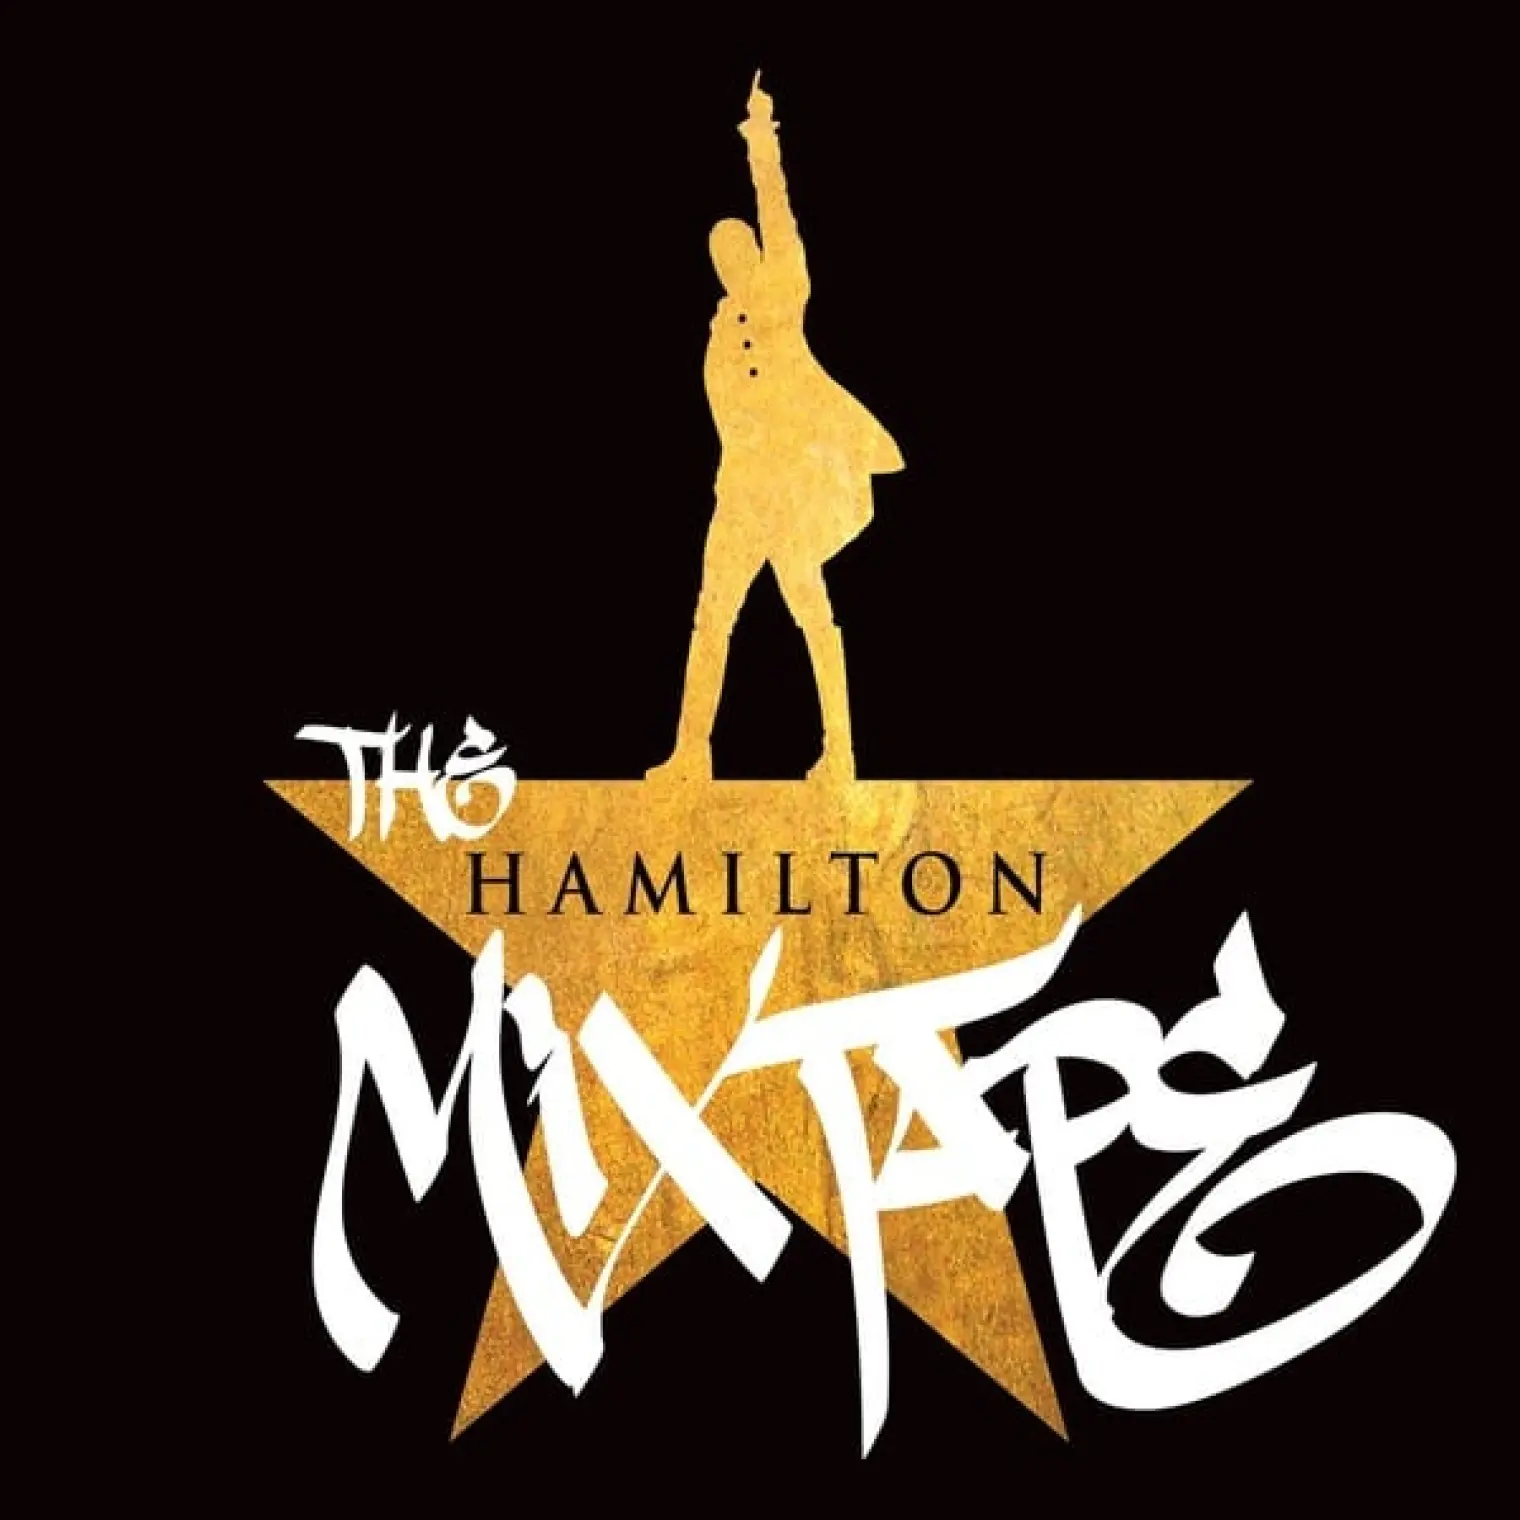 Satisfied (feat. Miguel & Queen Latifah) (from The Hamilton Mixtape) -  Sia 